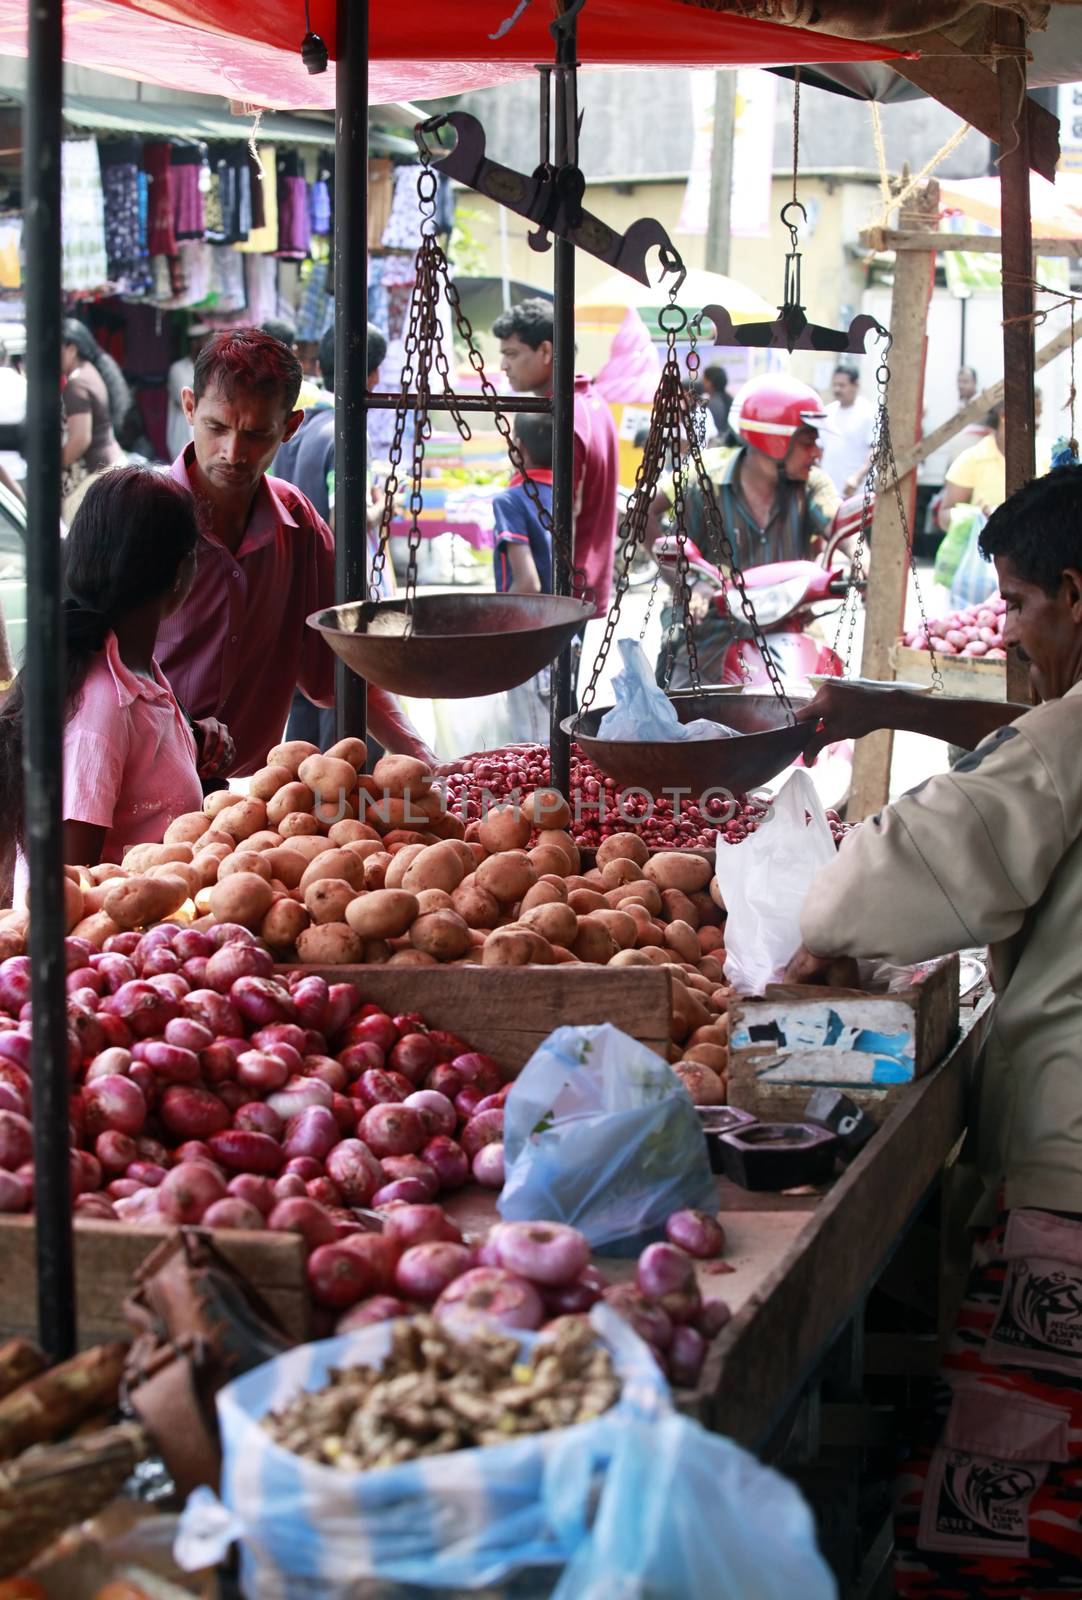 Colombo, Sri Lanka - April 9, 2011: Sri Lankan people on the fruit market in the Pettah district. The Pettah neighborhood is famous for its open air bazaars and markets